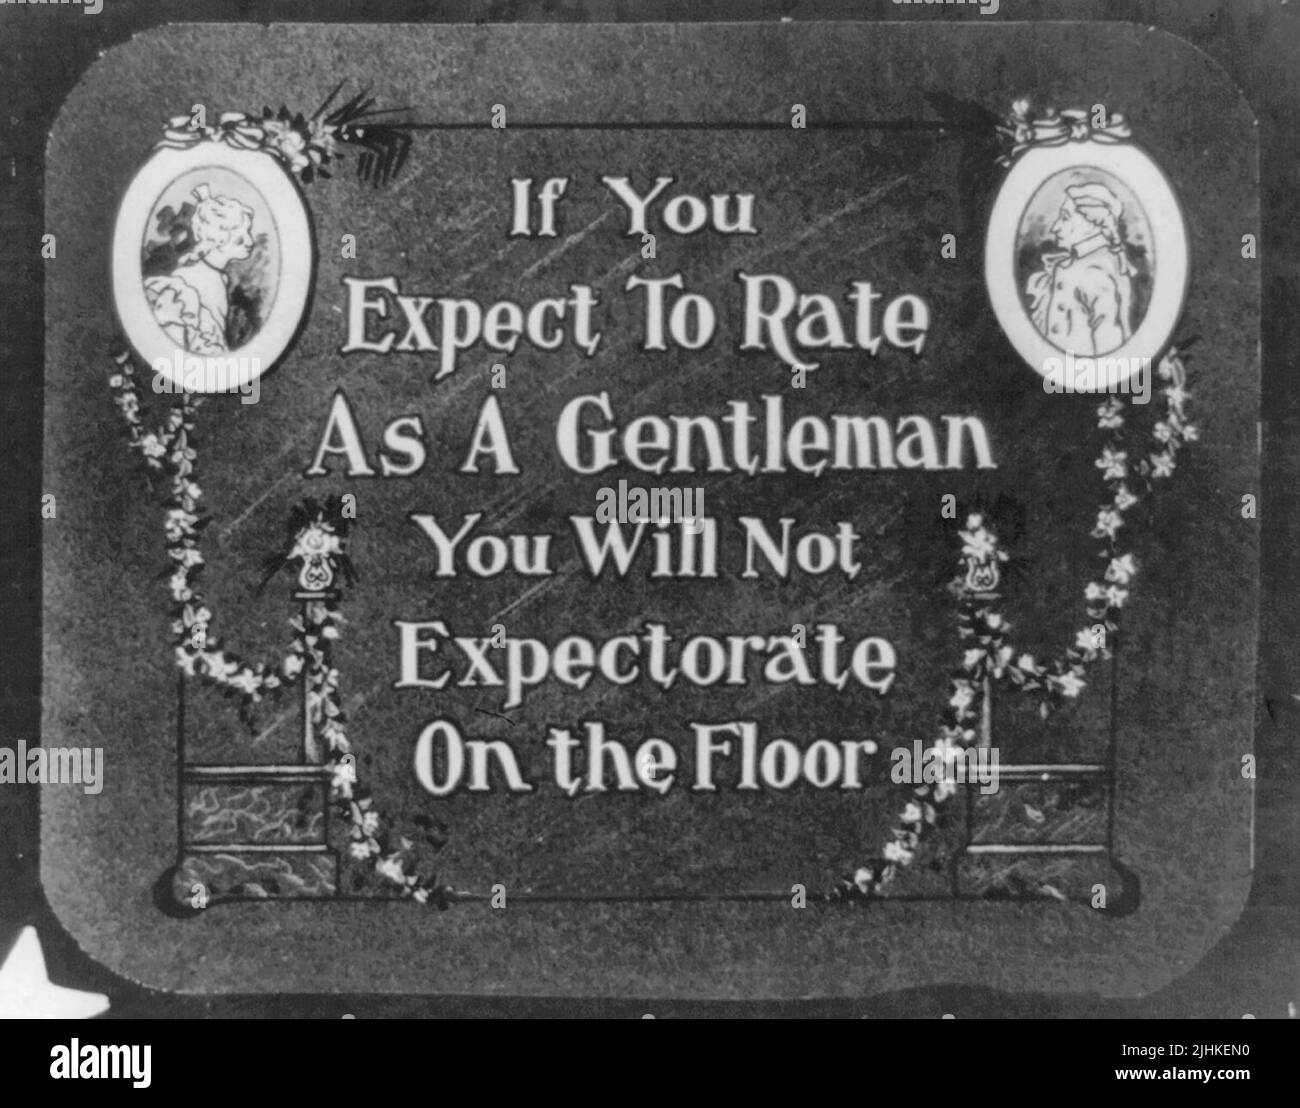 If you expect to rate as a gentleman, you will not expectorate on the floor. Paper print made from lantern slide used as announcemenet in motion picture theaters Stock Photo